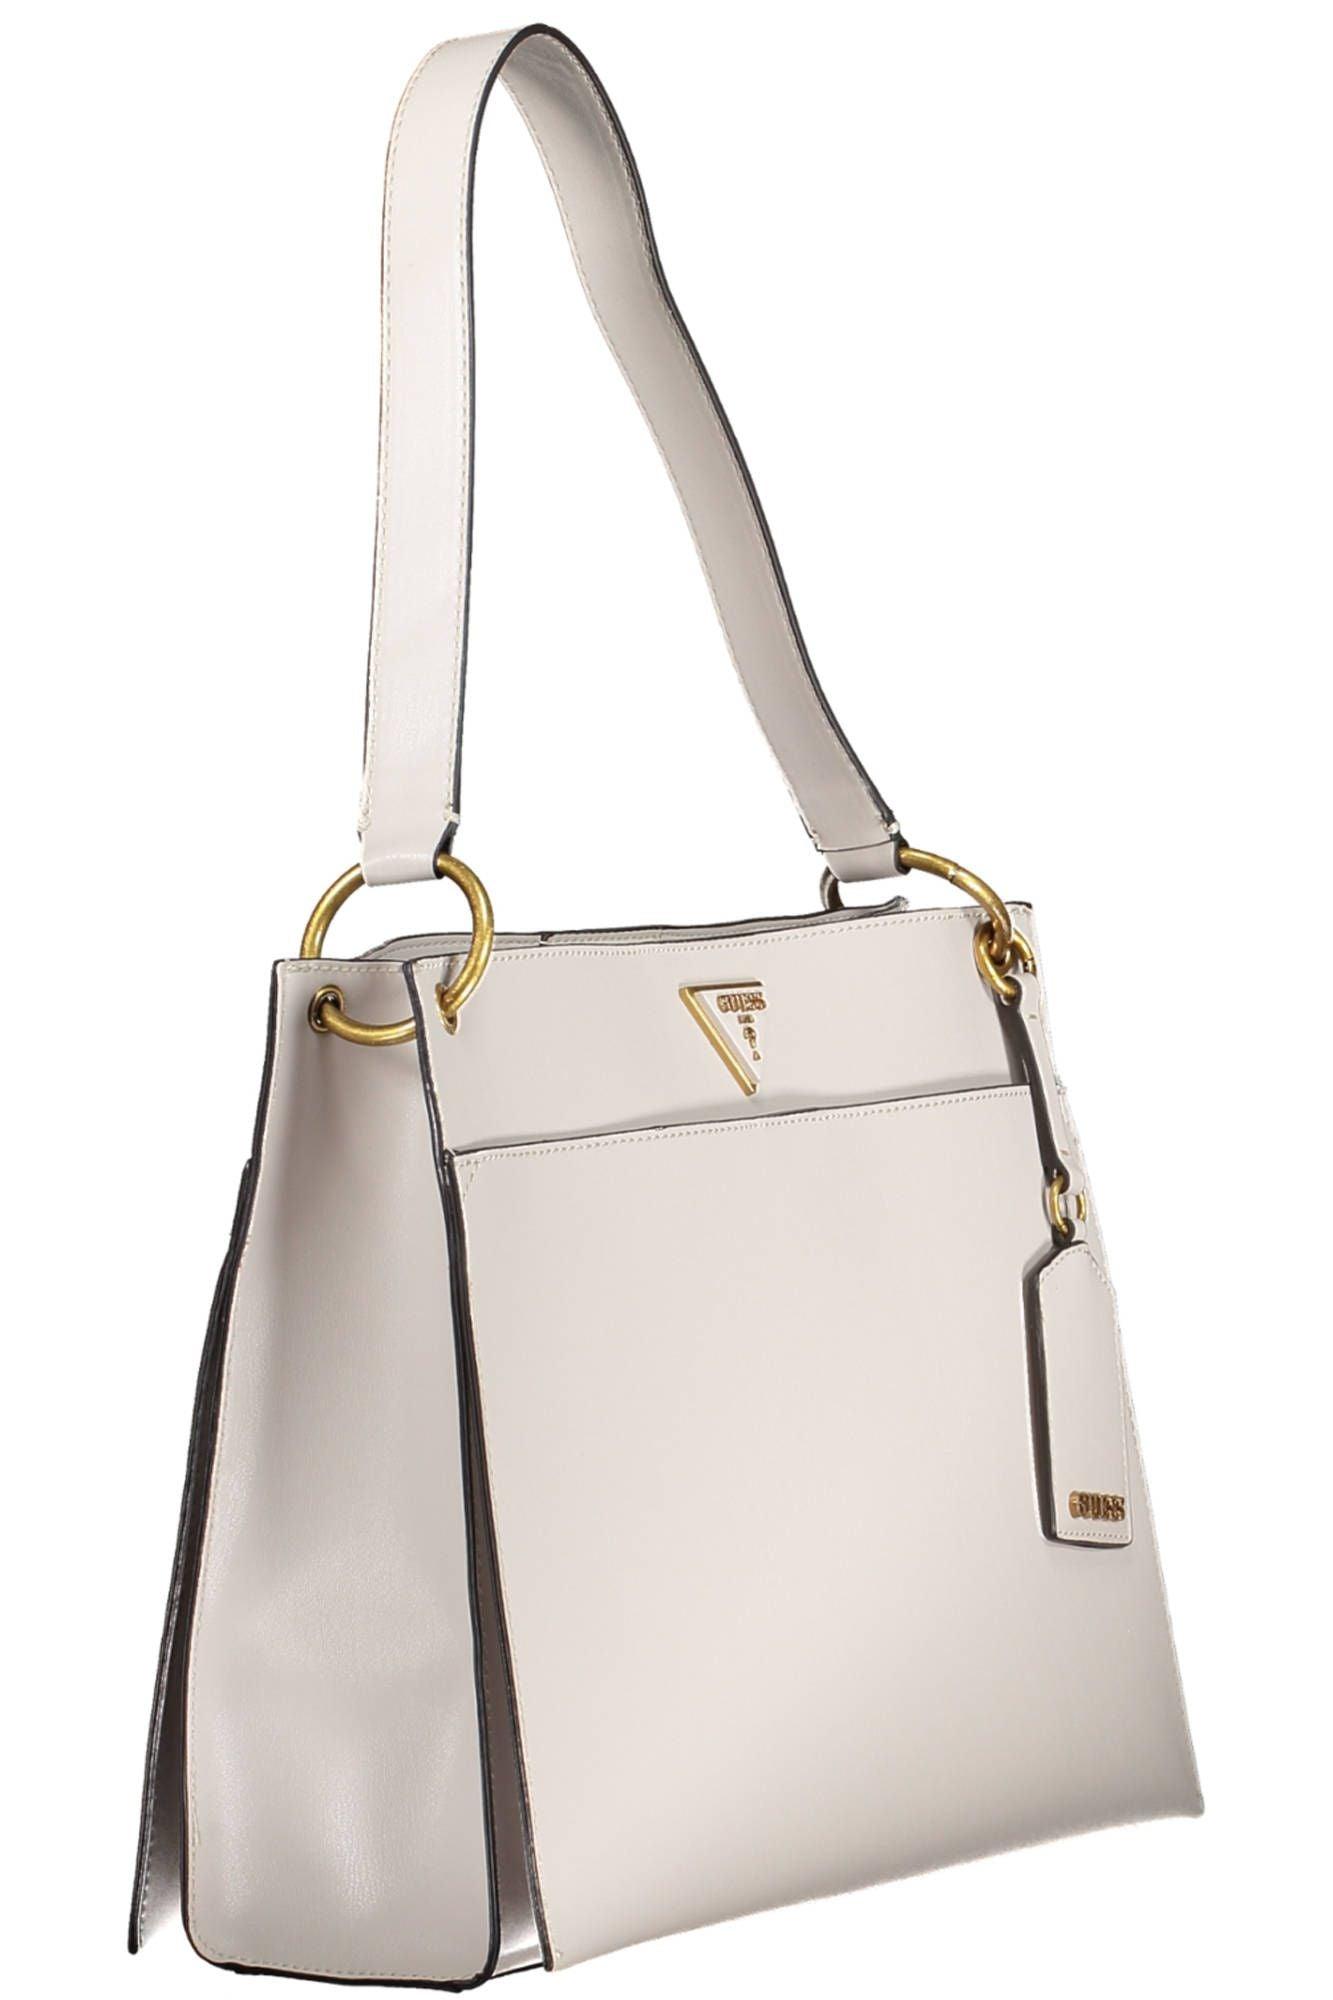 Guess Jeans Chic Gray Shoulder Bag with Contrasting Details - PER.FASHION